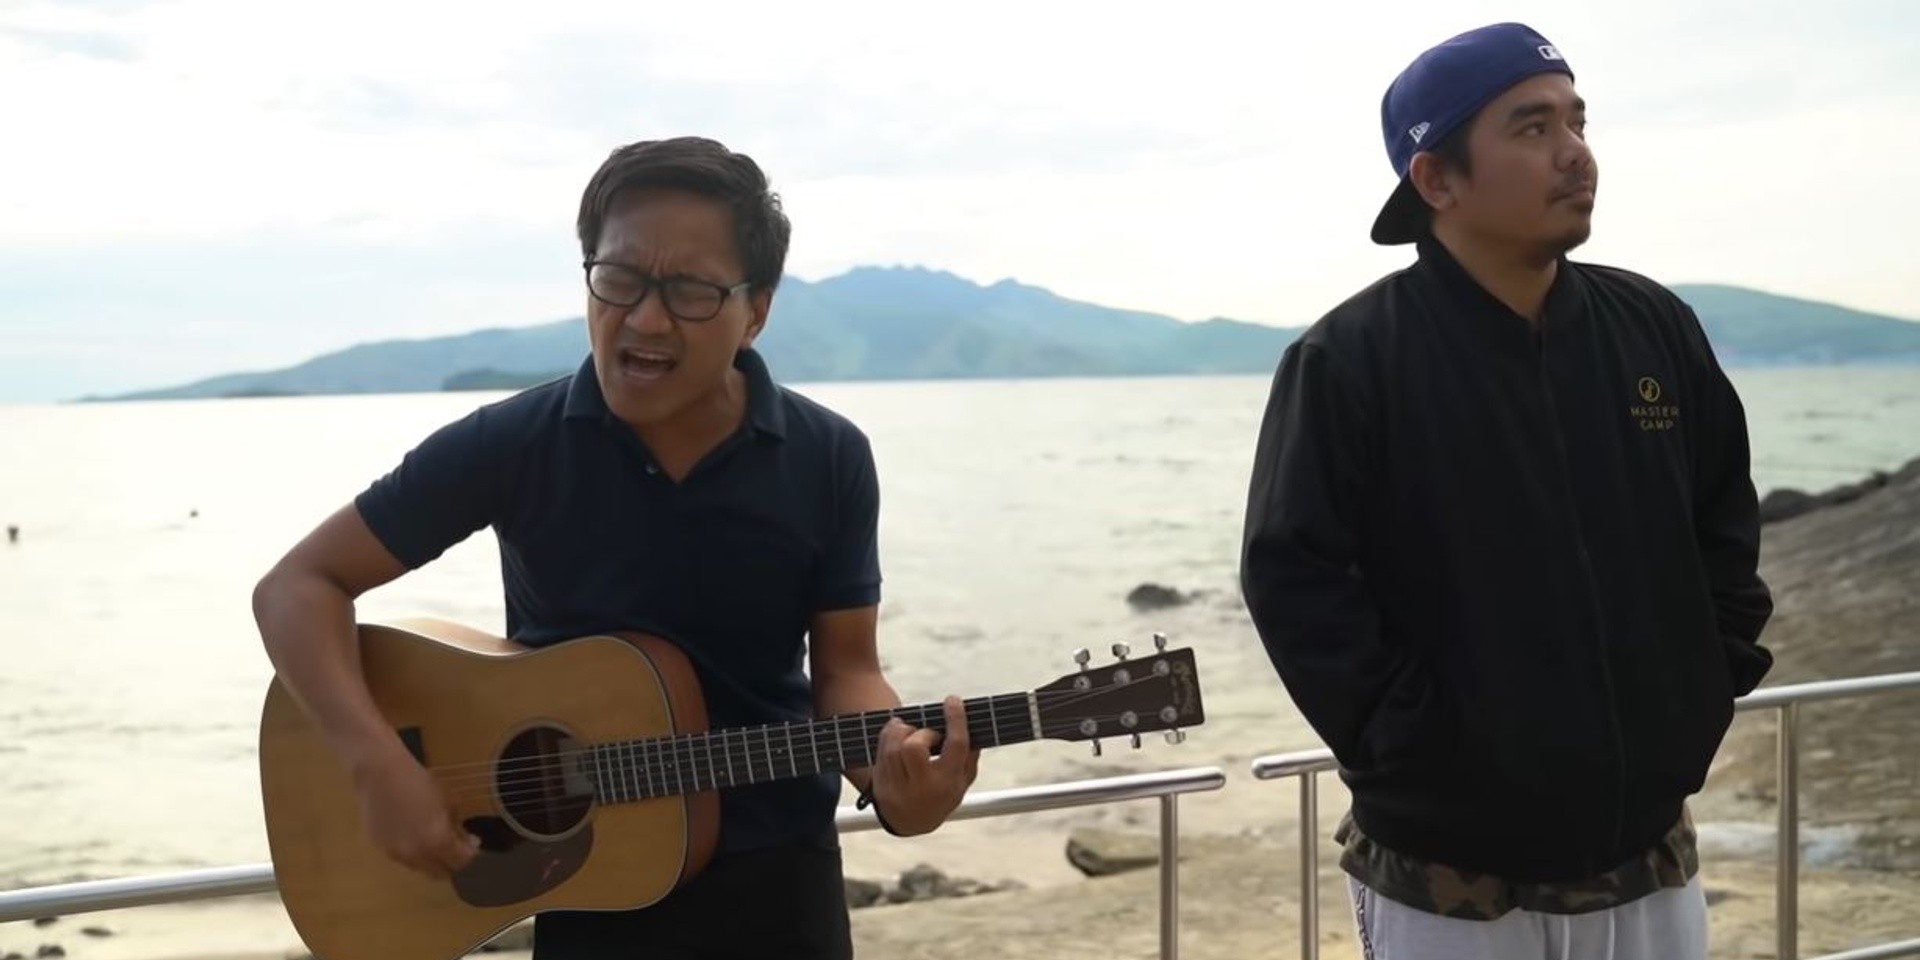 Gloc-9 and Ebe Dancel team up in acoustic performance of 'Sirena' – watch